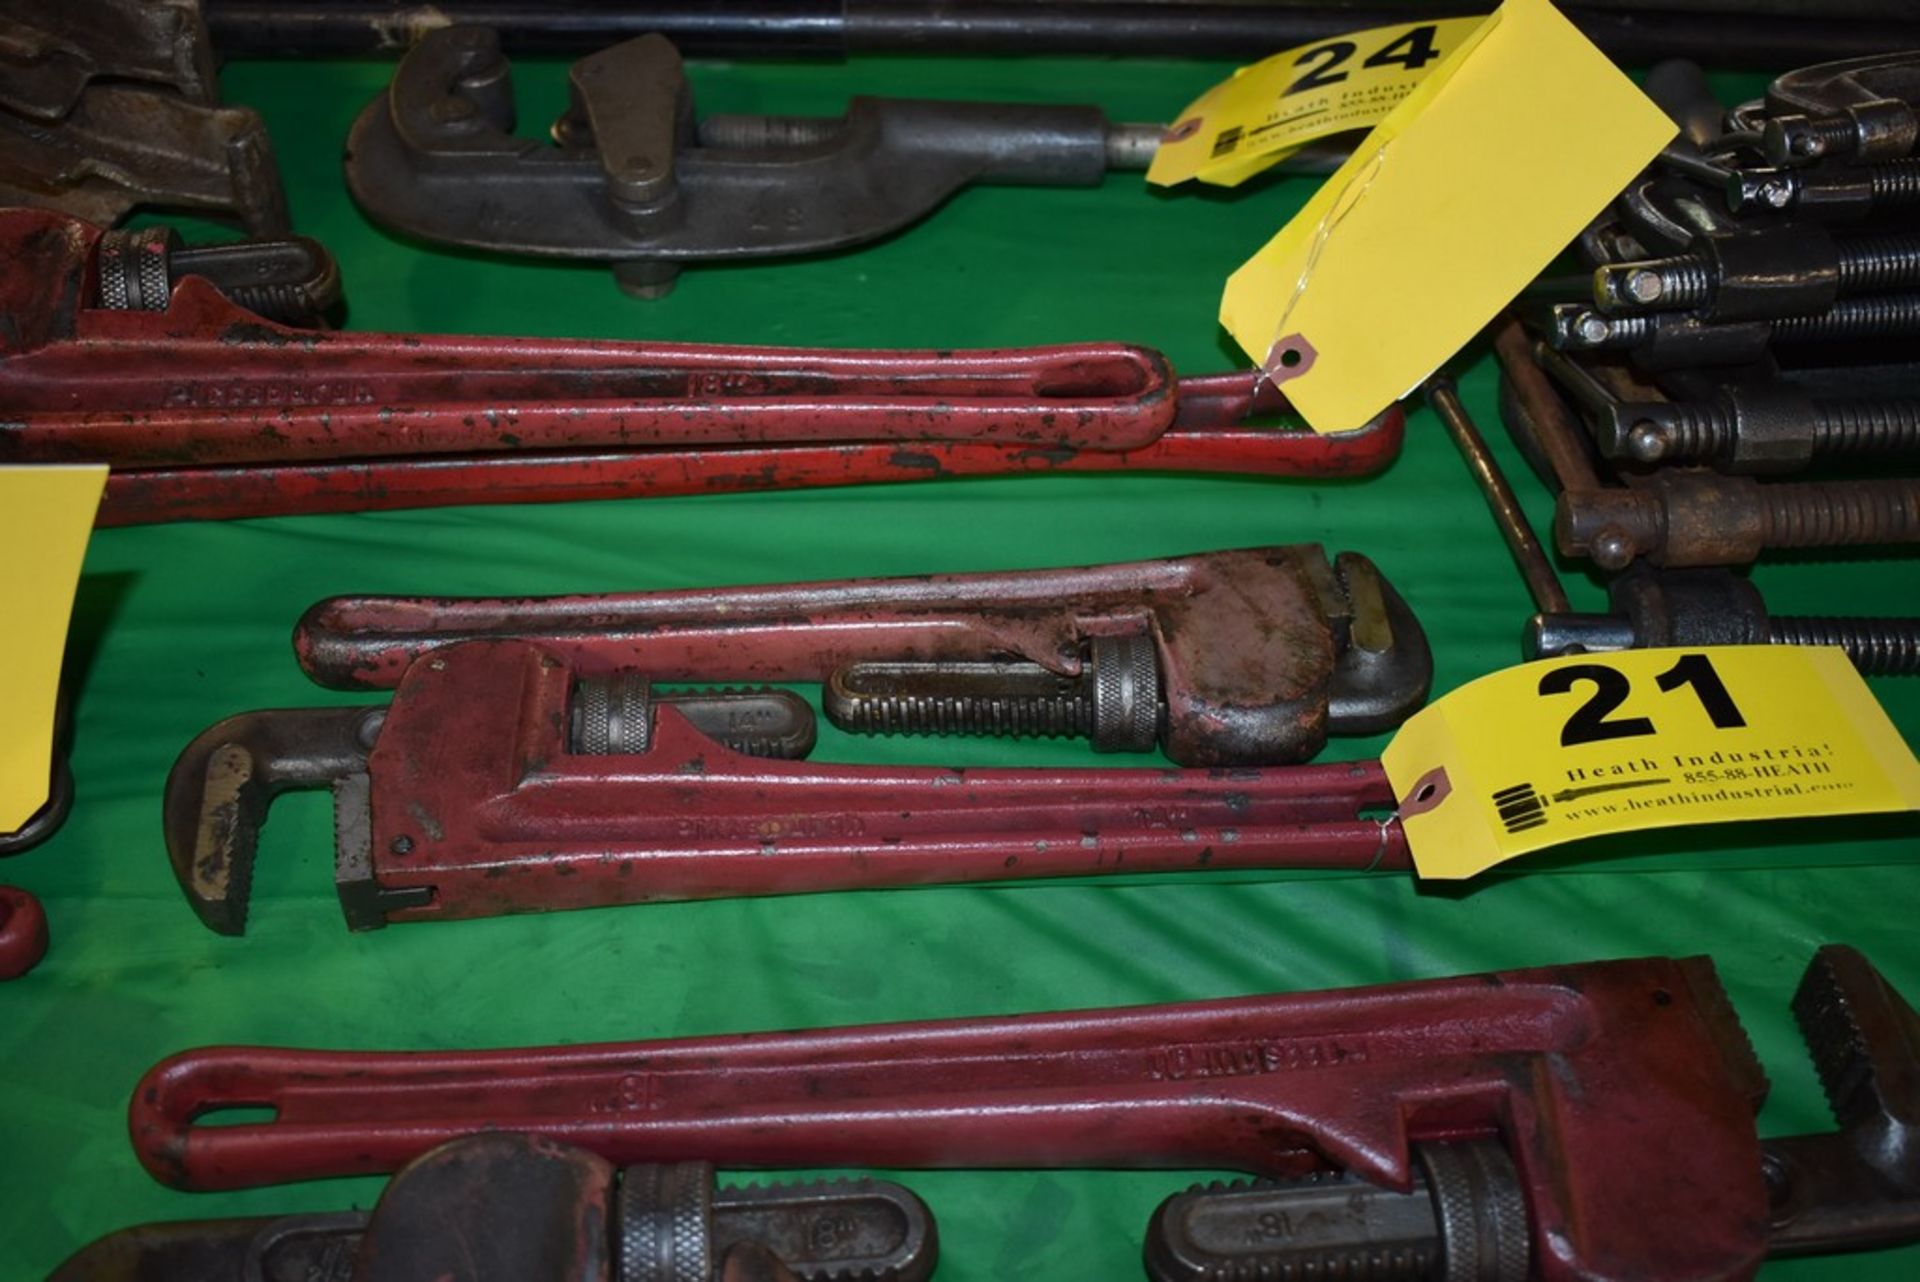 (2) PITTSBURGH 14 PIPE WRENCHES